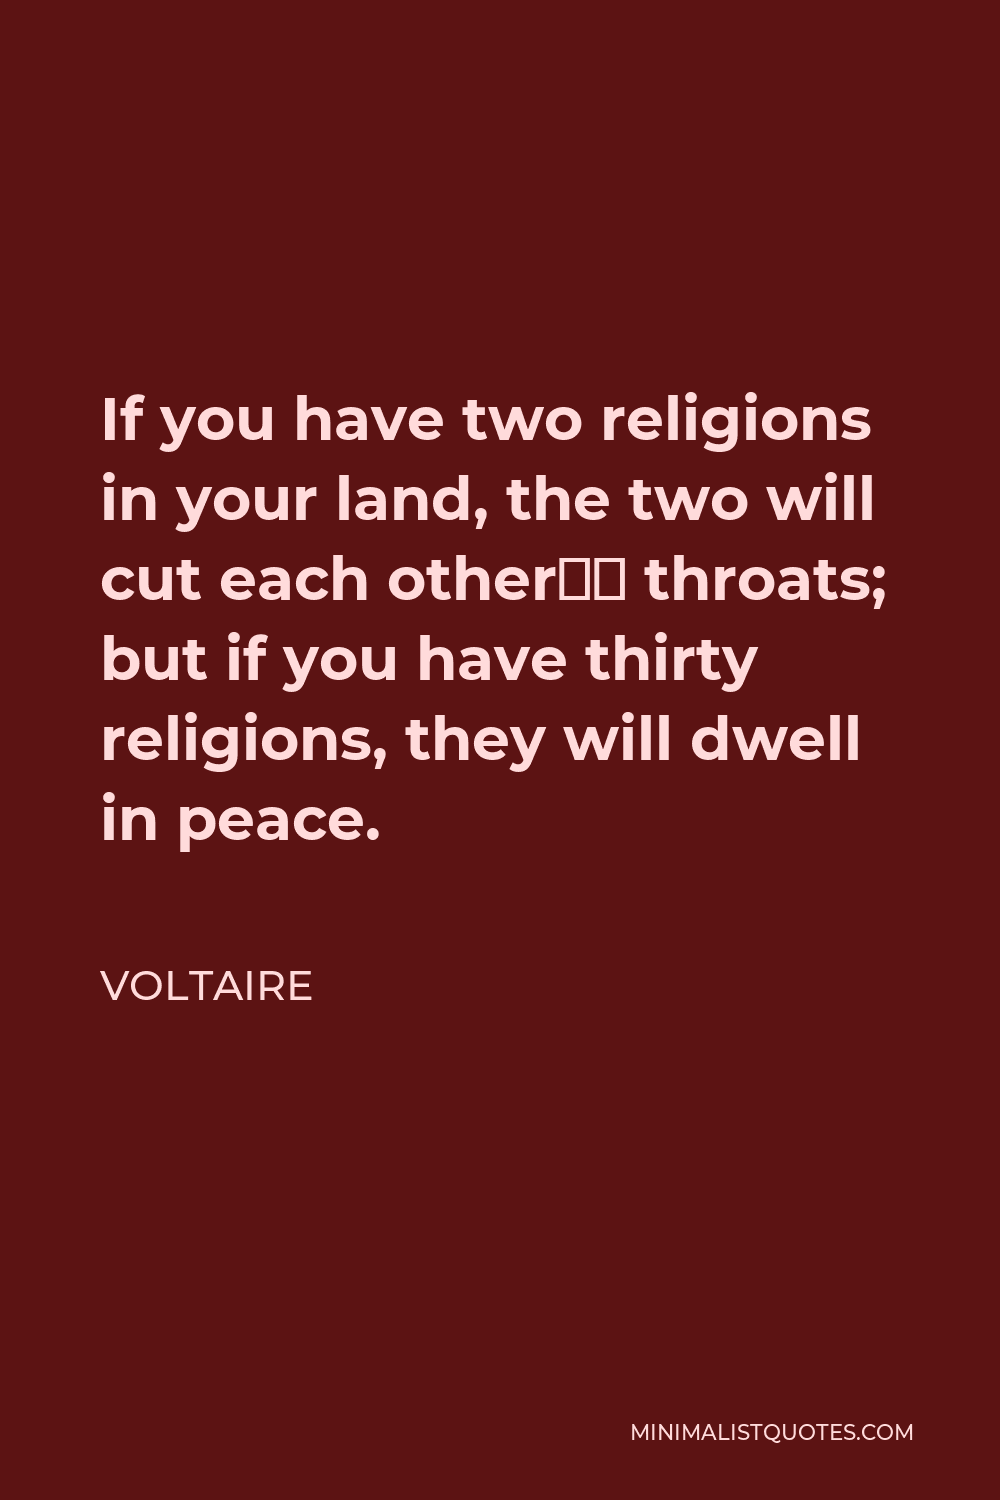 Voltaire Quote - If you have two religions in your land, the two will cut each other’s throats; but if you have thirty religions, they will dwell in peace.